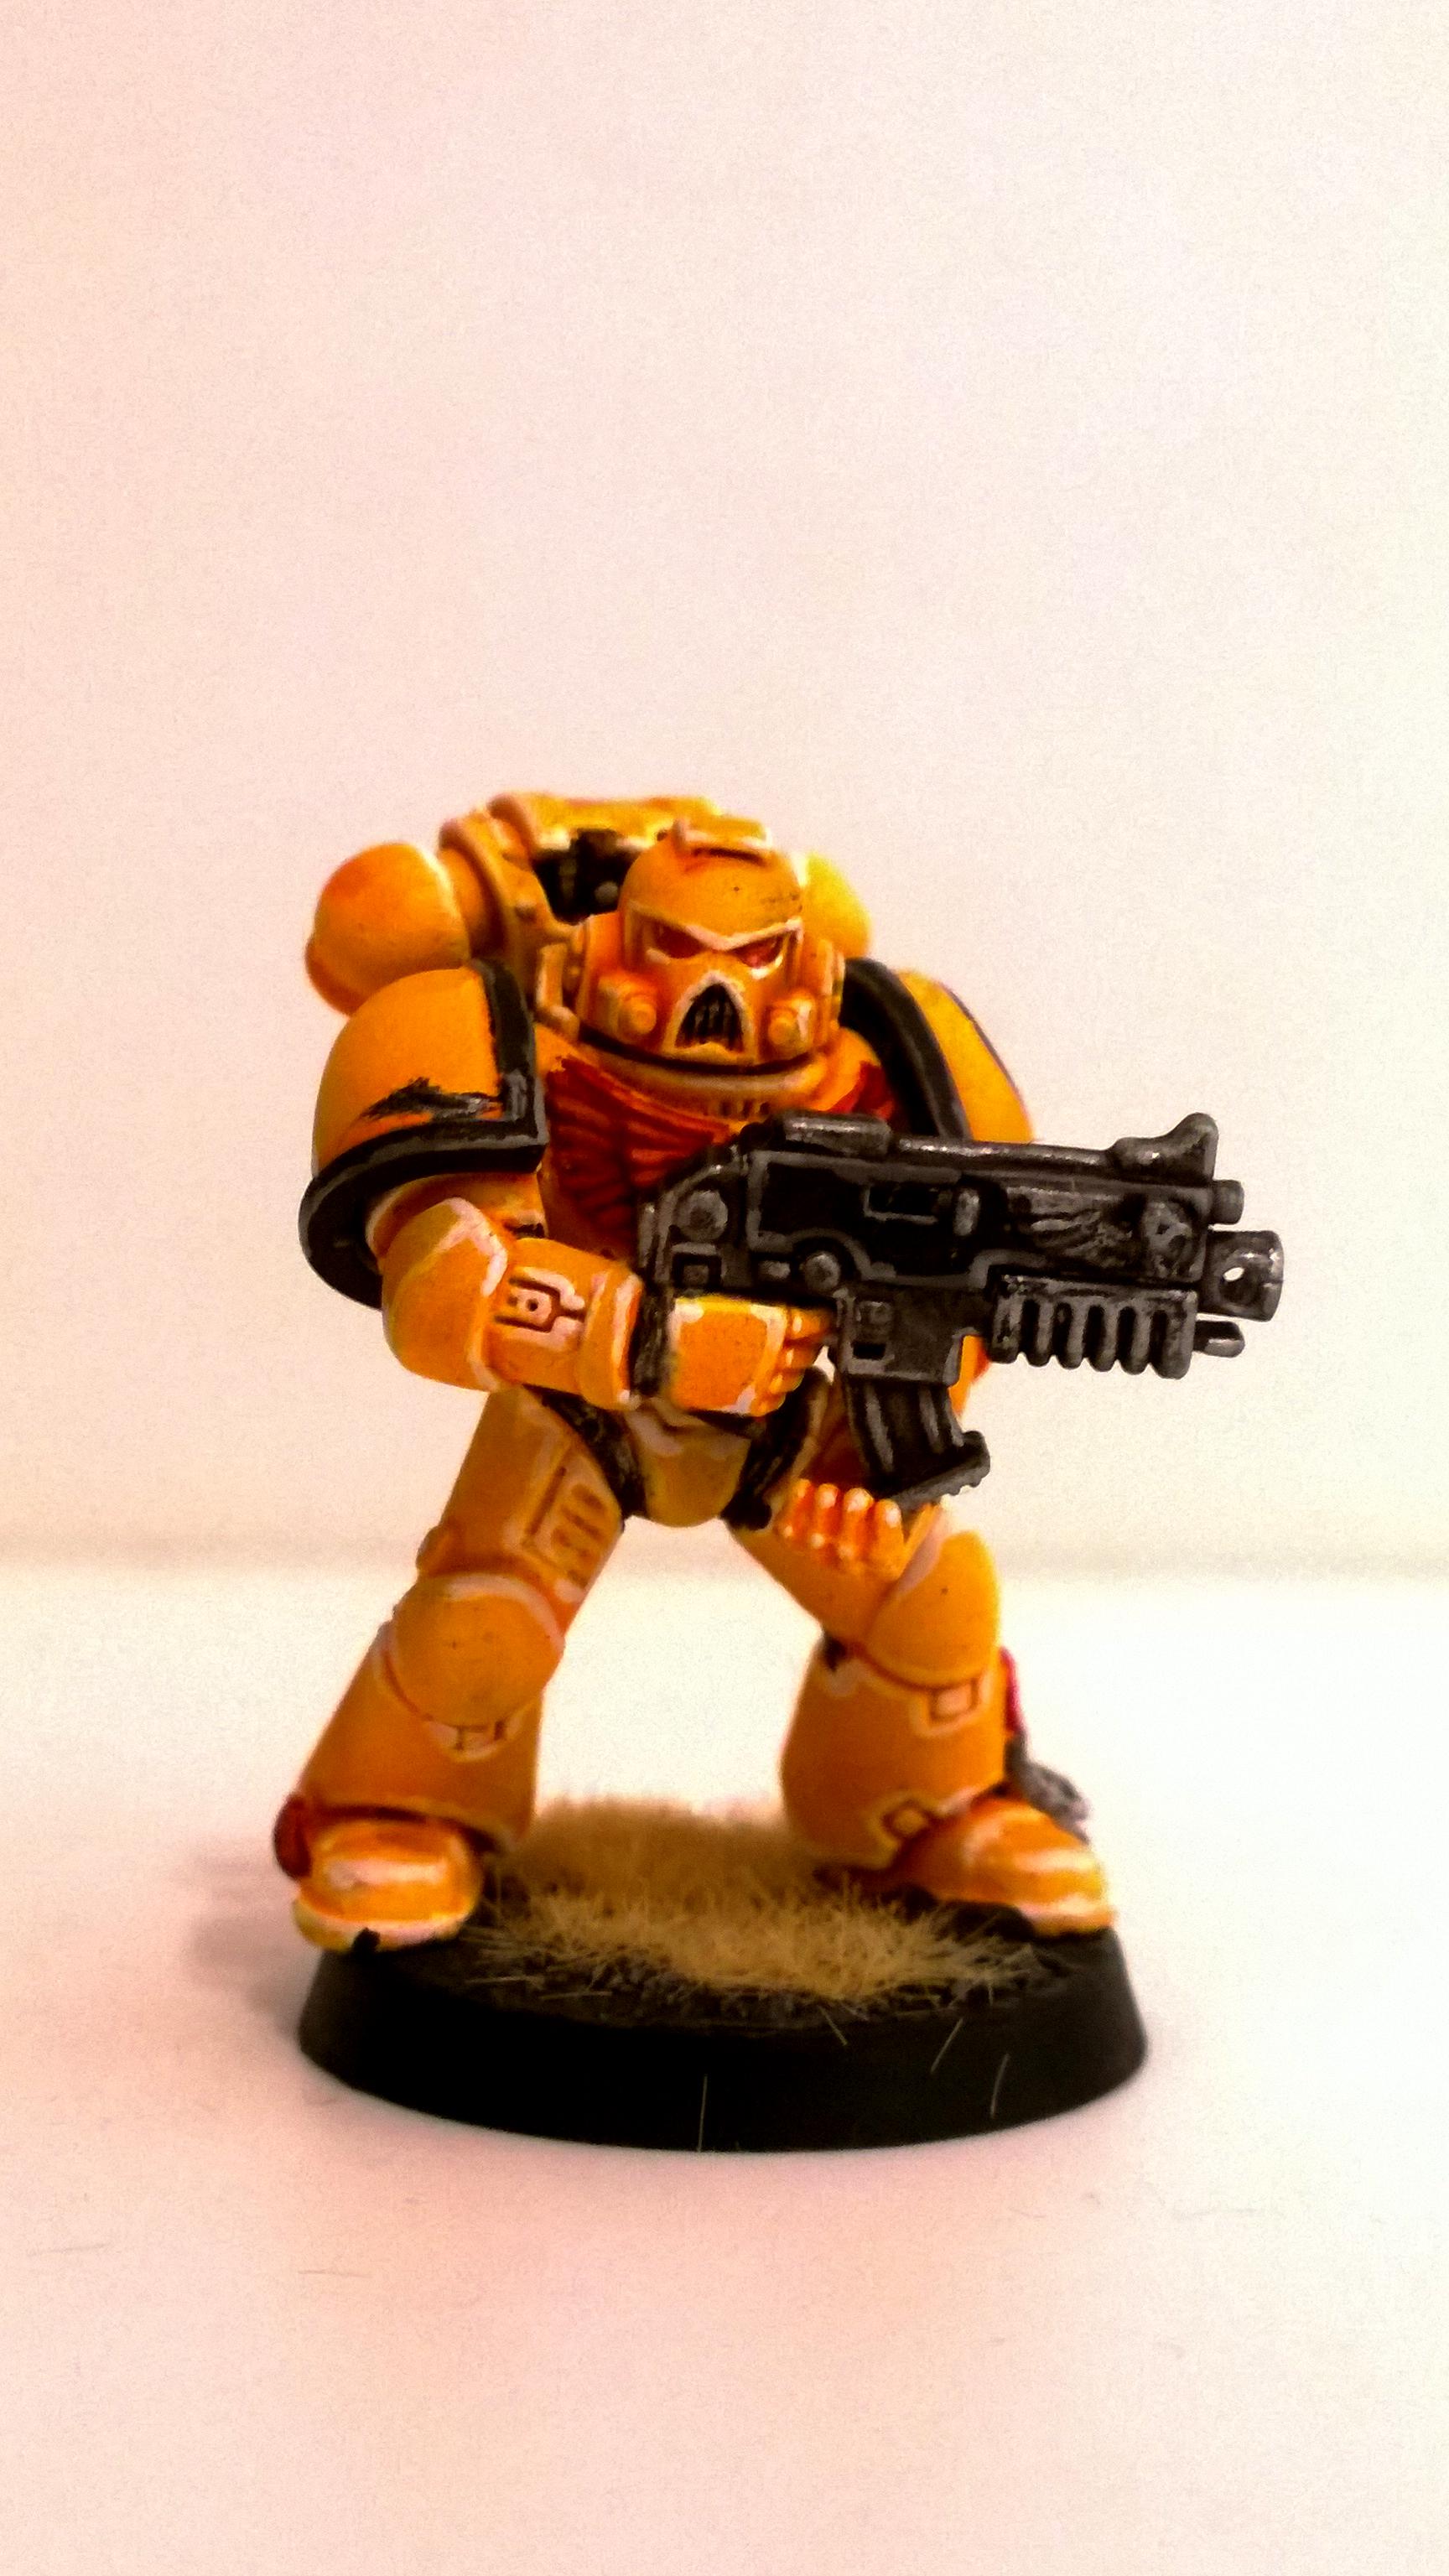 Imperial Fist 2